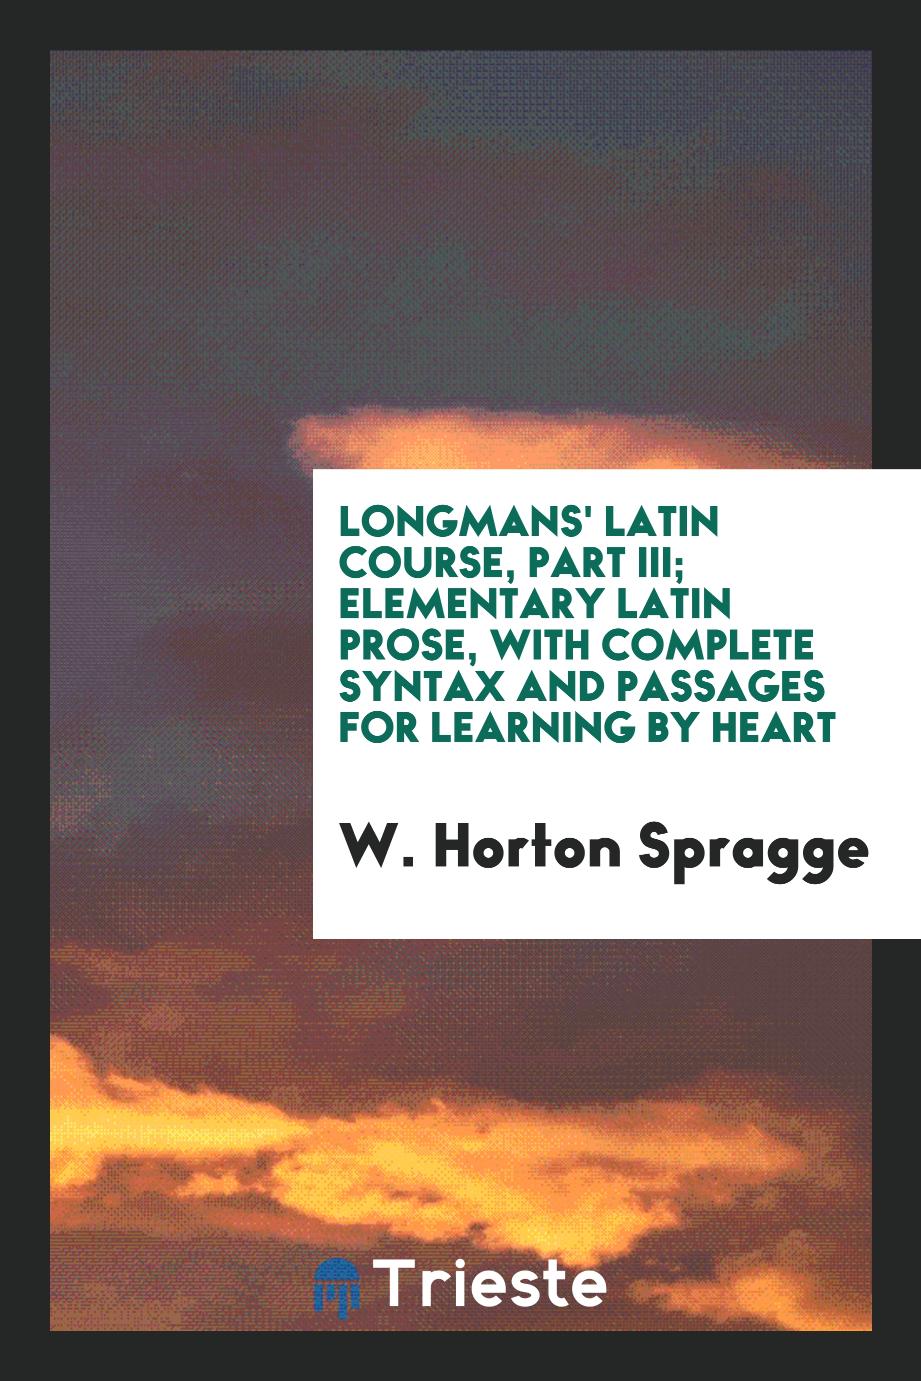 Longmans' Latin course, Part III; Elementary Latin prose, with complete syntax and passages for learning by heart